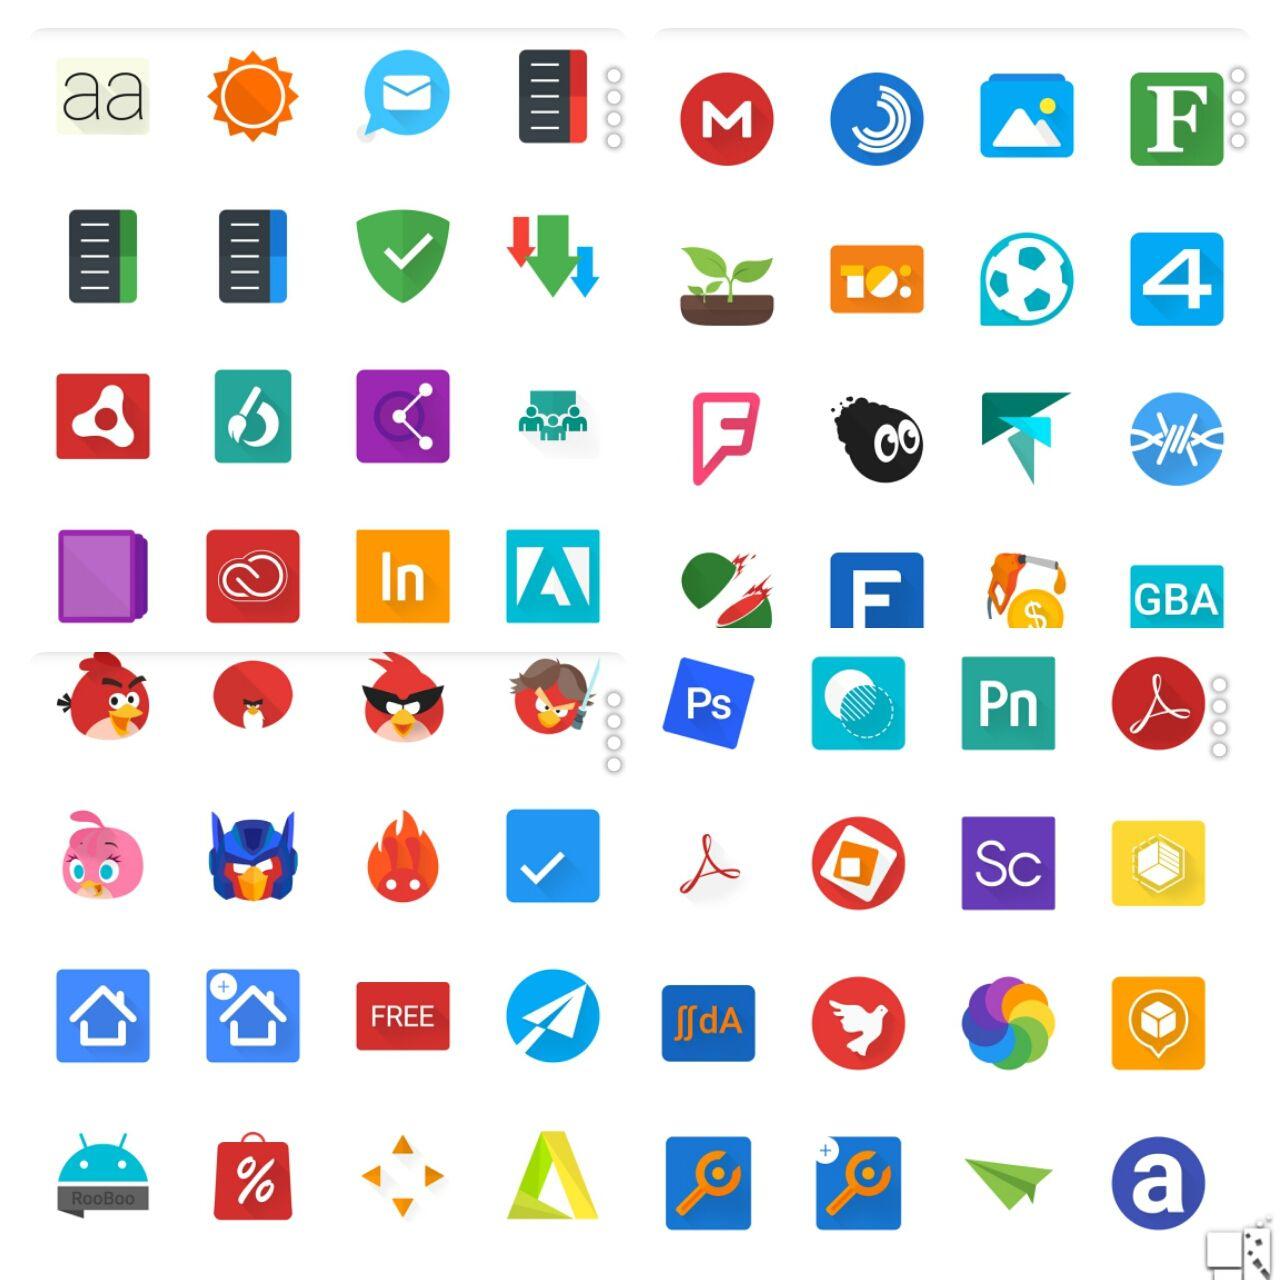 Popular App Logo - ICON PACKS THAT YOU SHOULD HAVE